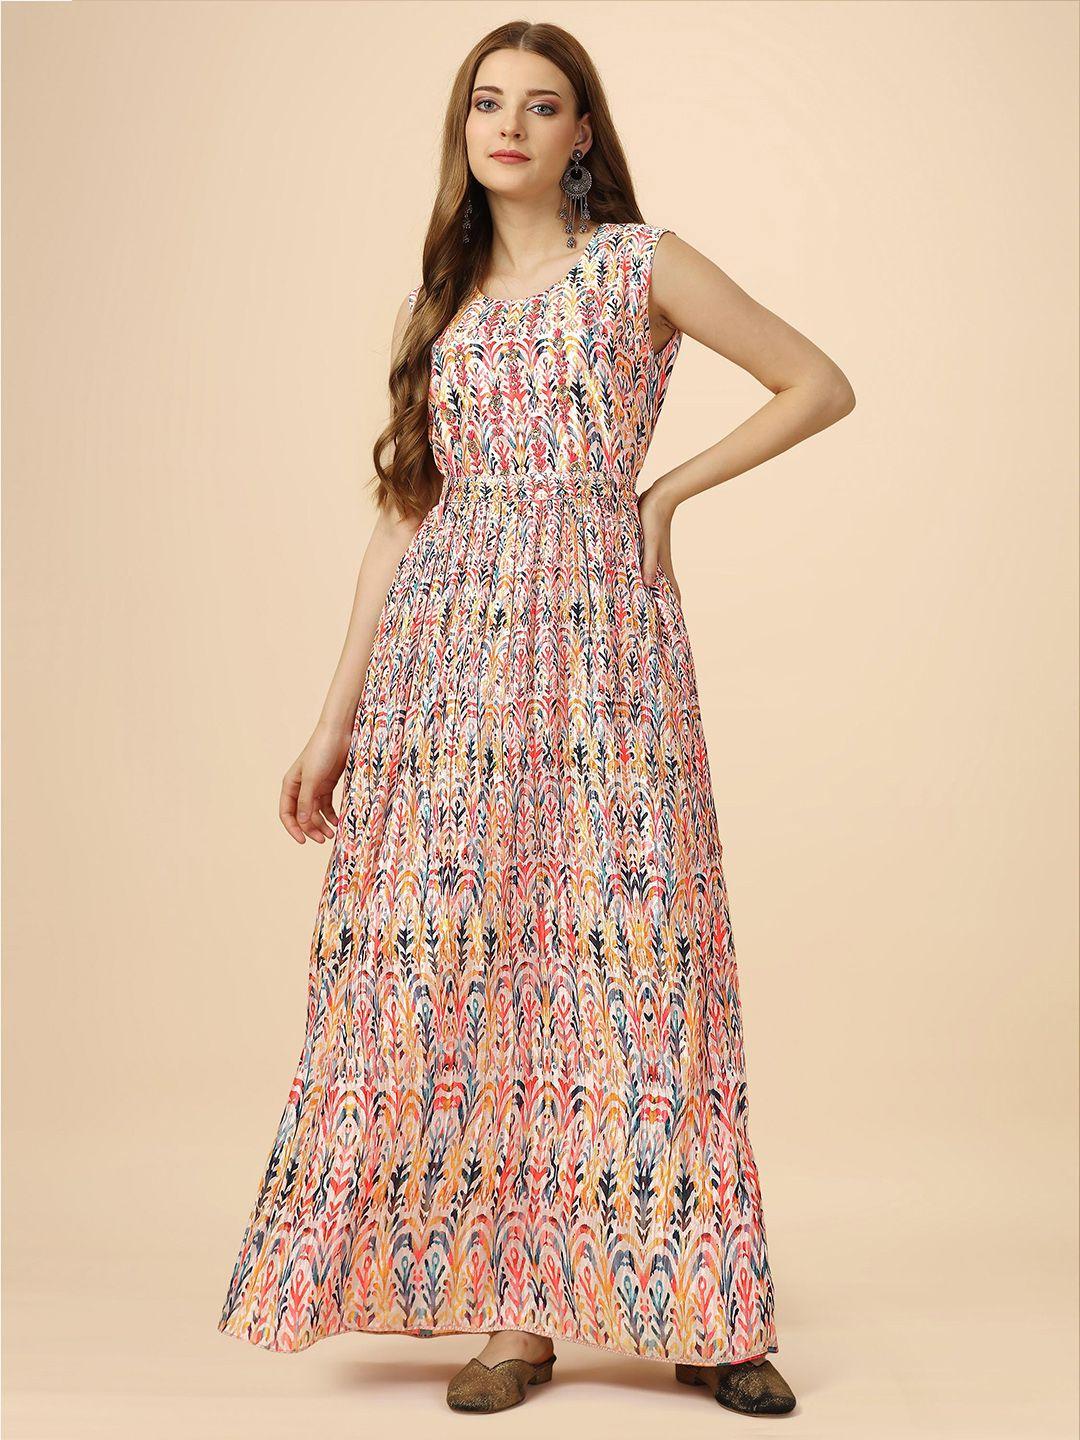 heemara floral printed sequined accordion pleated chiffon fit & flare ethnic dress